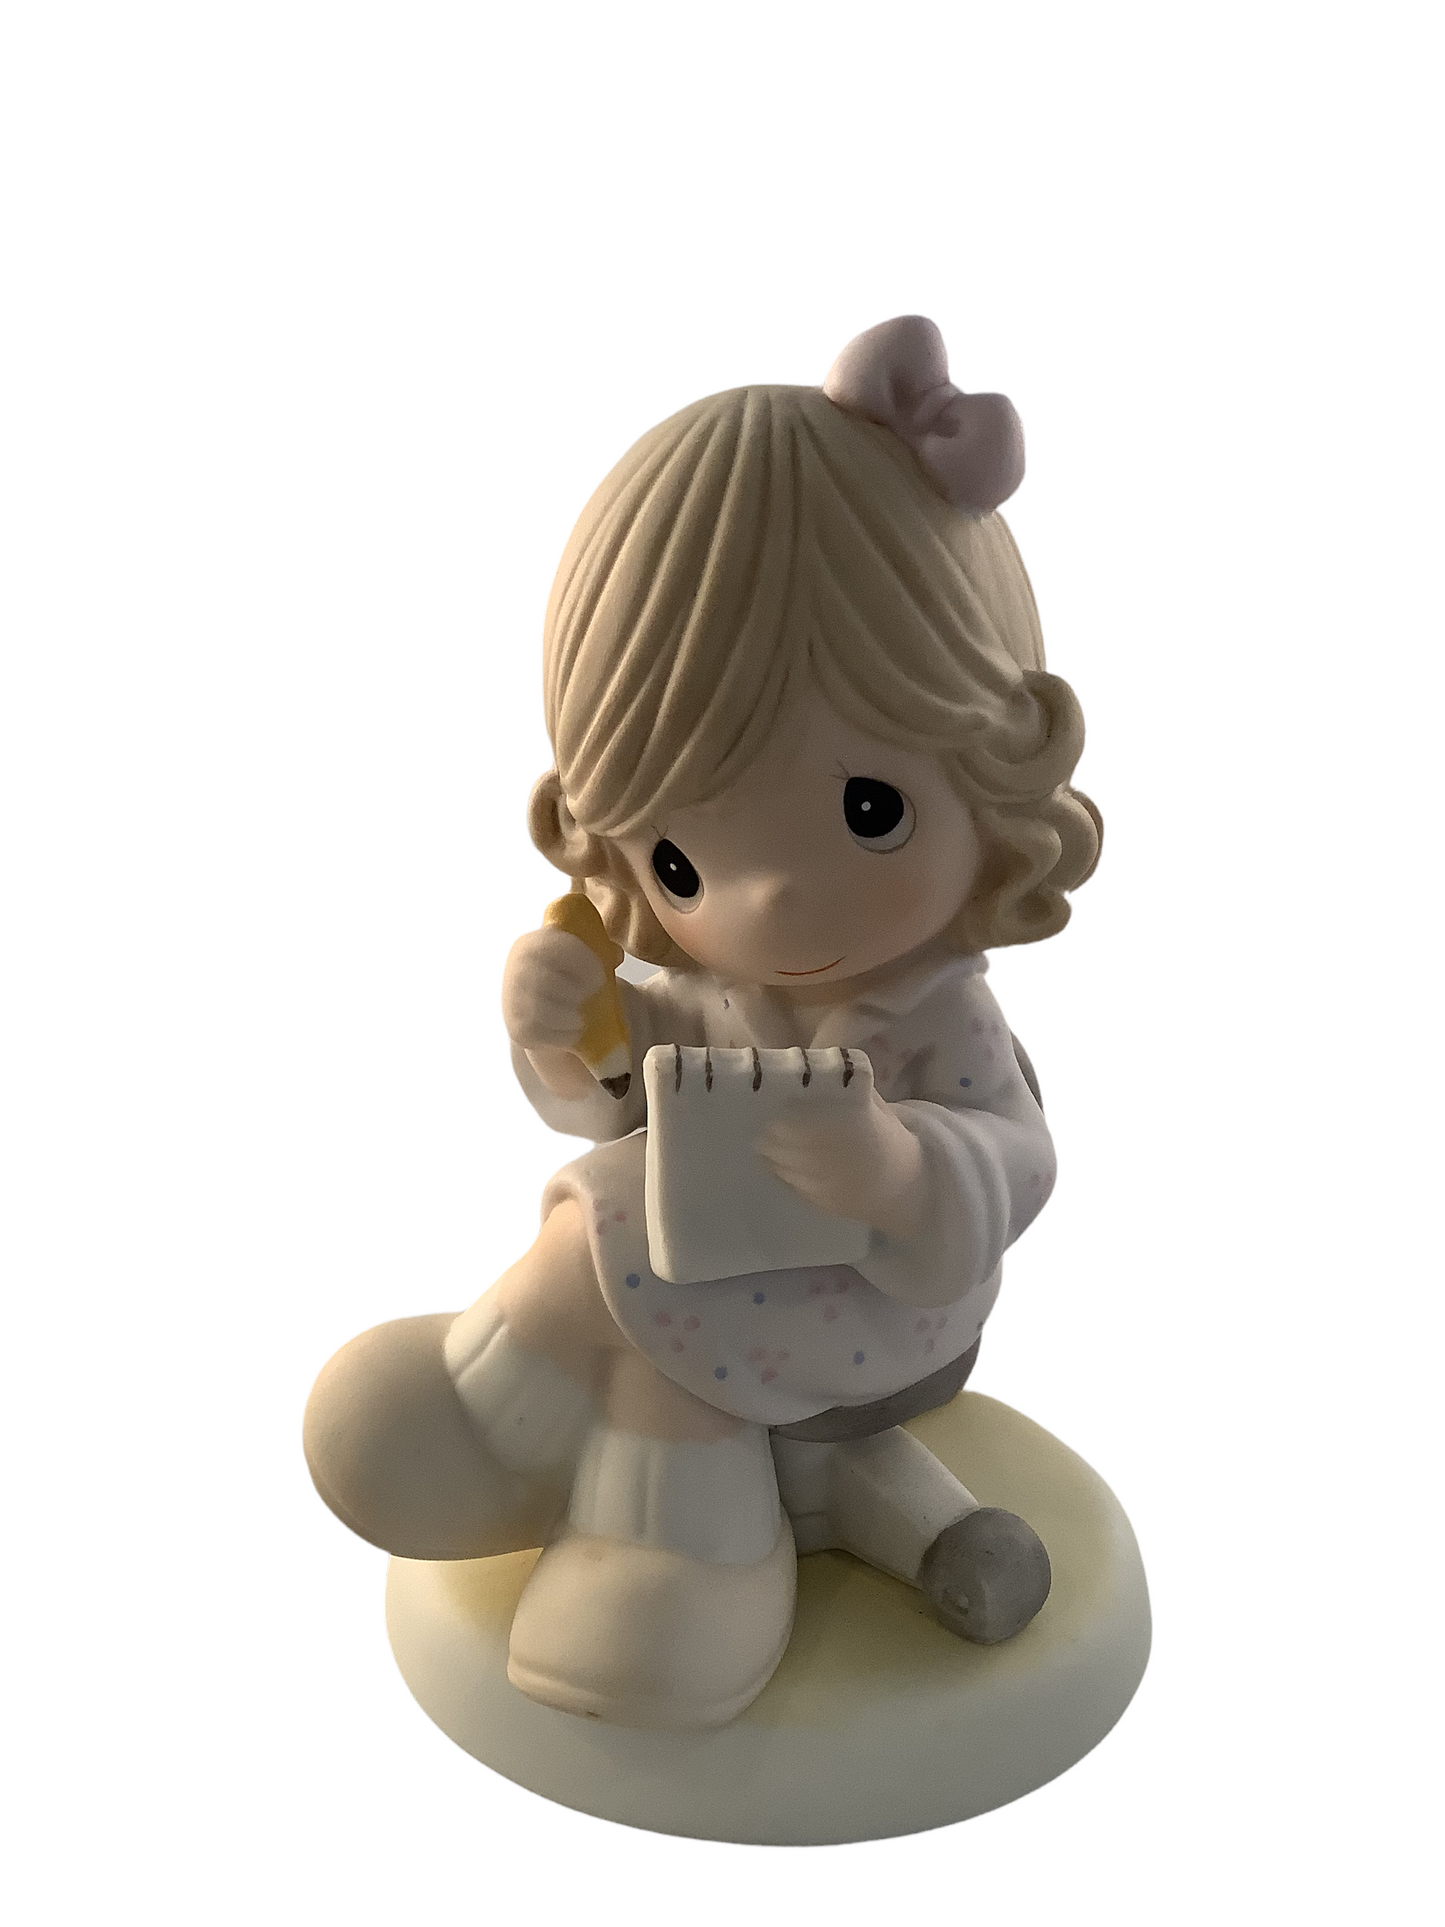 Take A Note, You're Great - Precious Moment Figurine